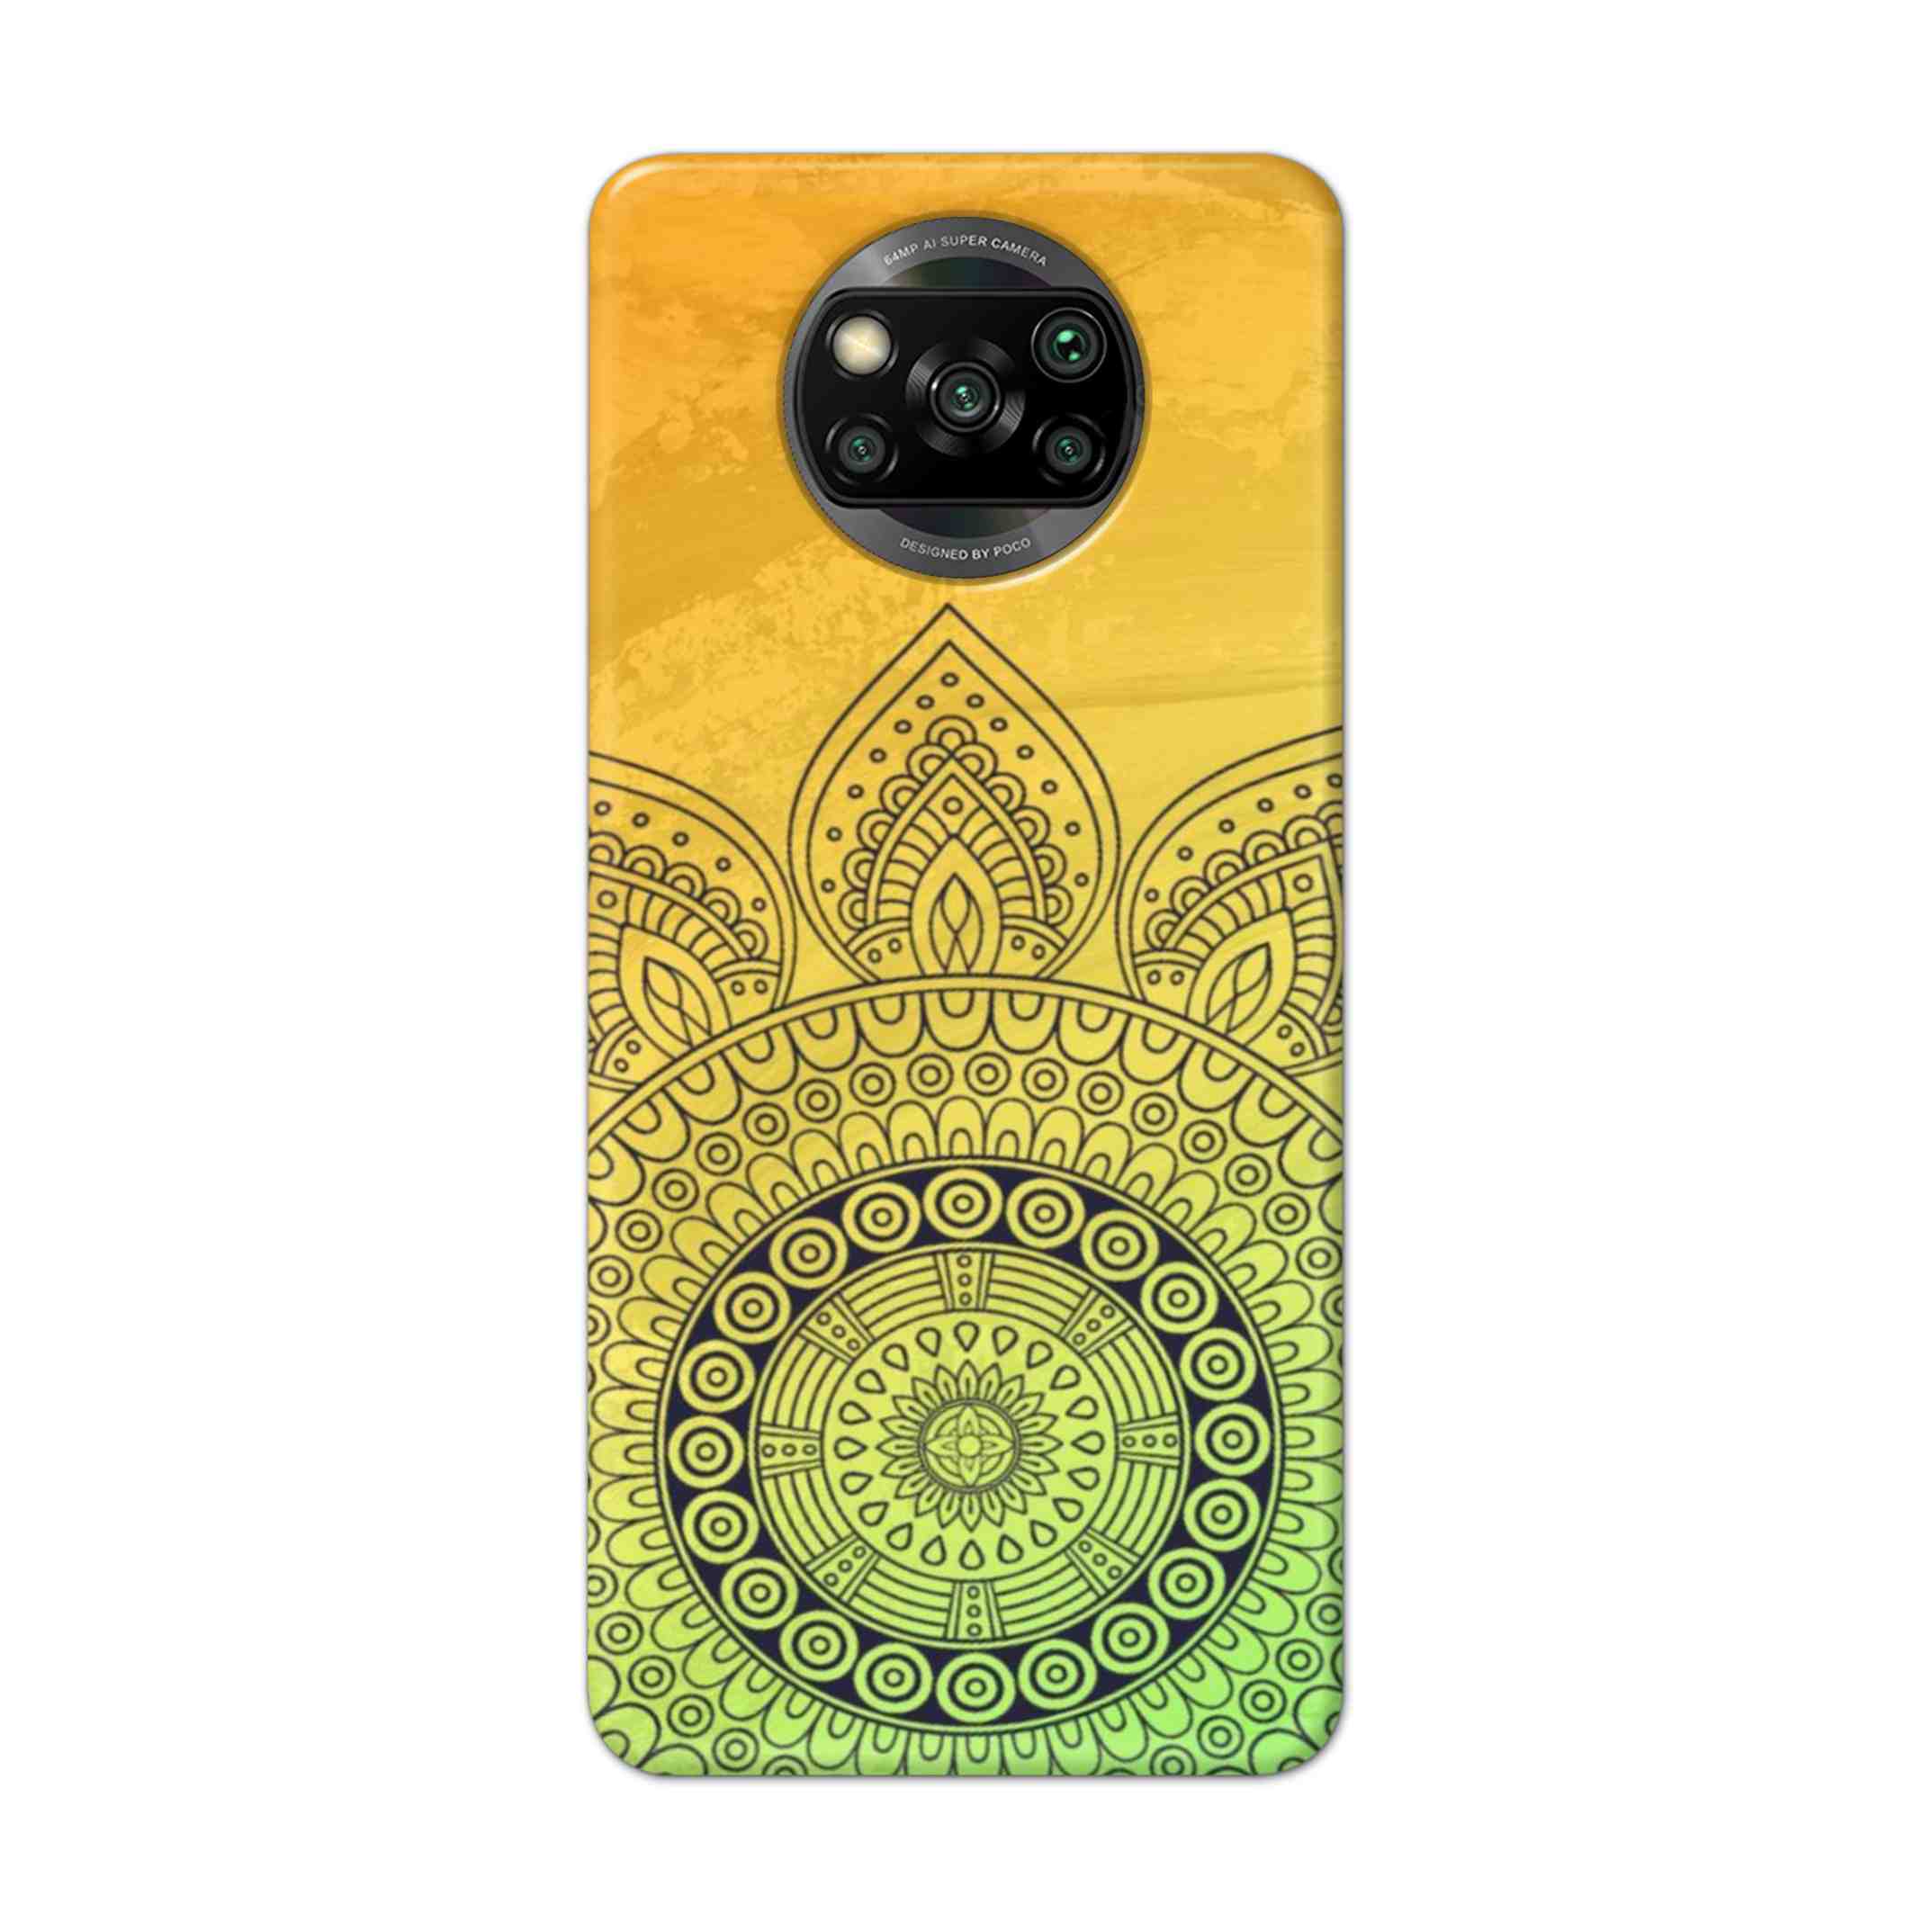 Buy Yellow Rangoli Hard Back Mobile Phone Case Cover For Pcoc X3 NFC Online